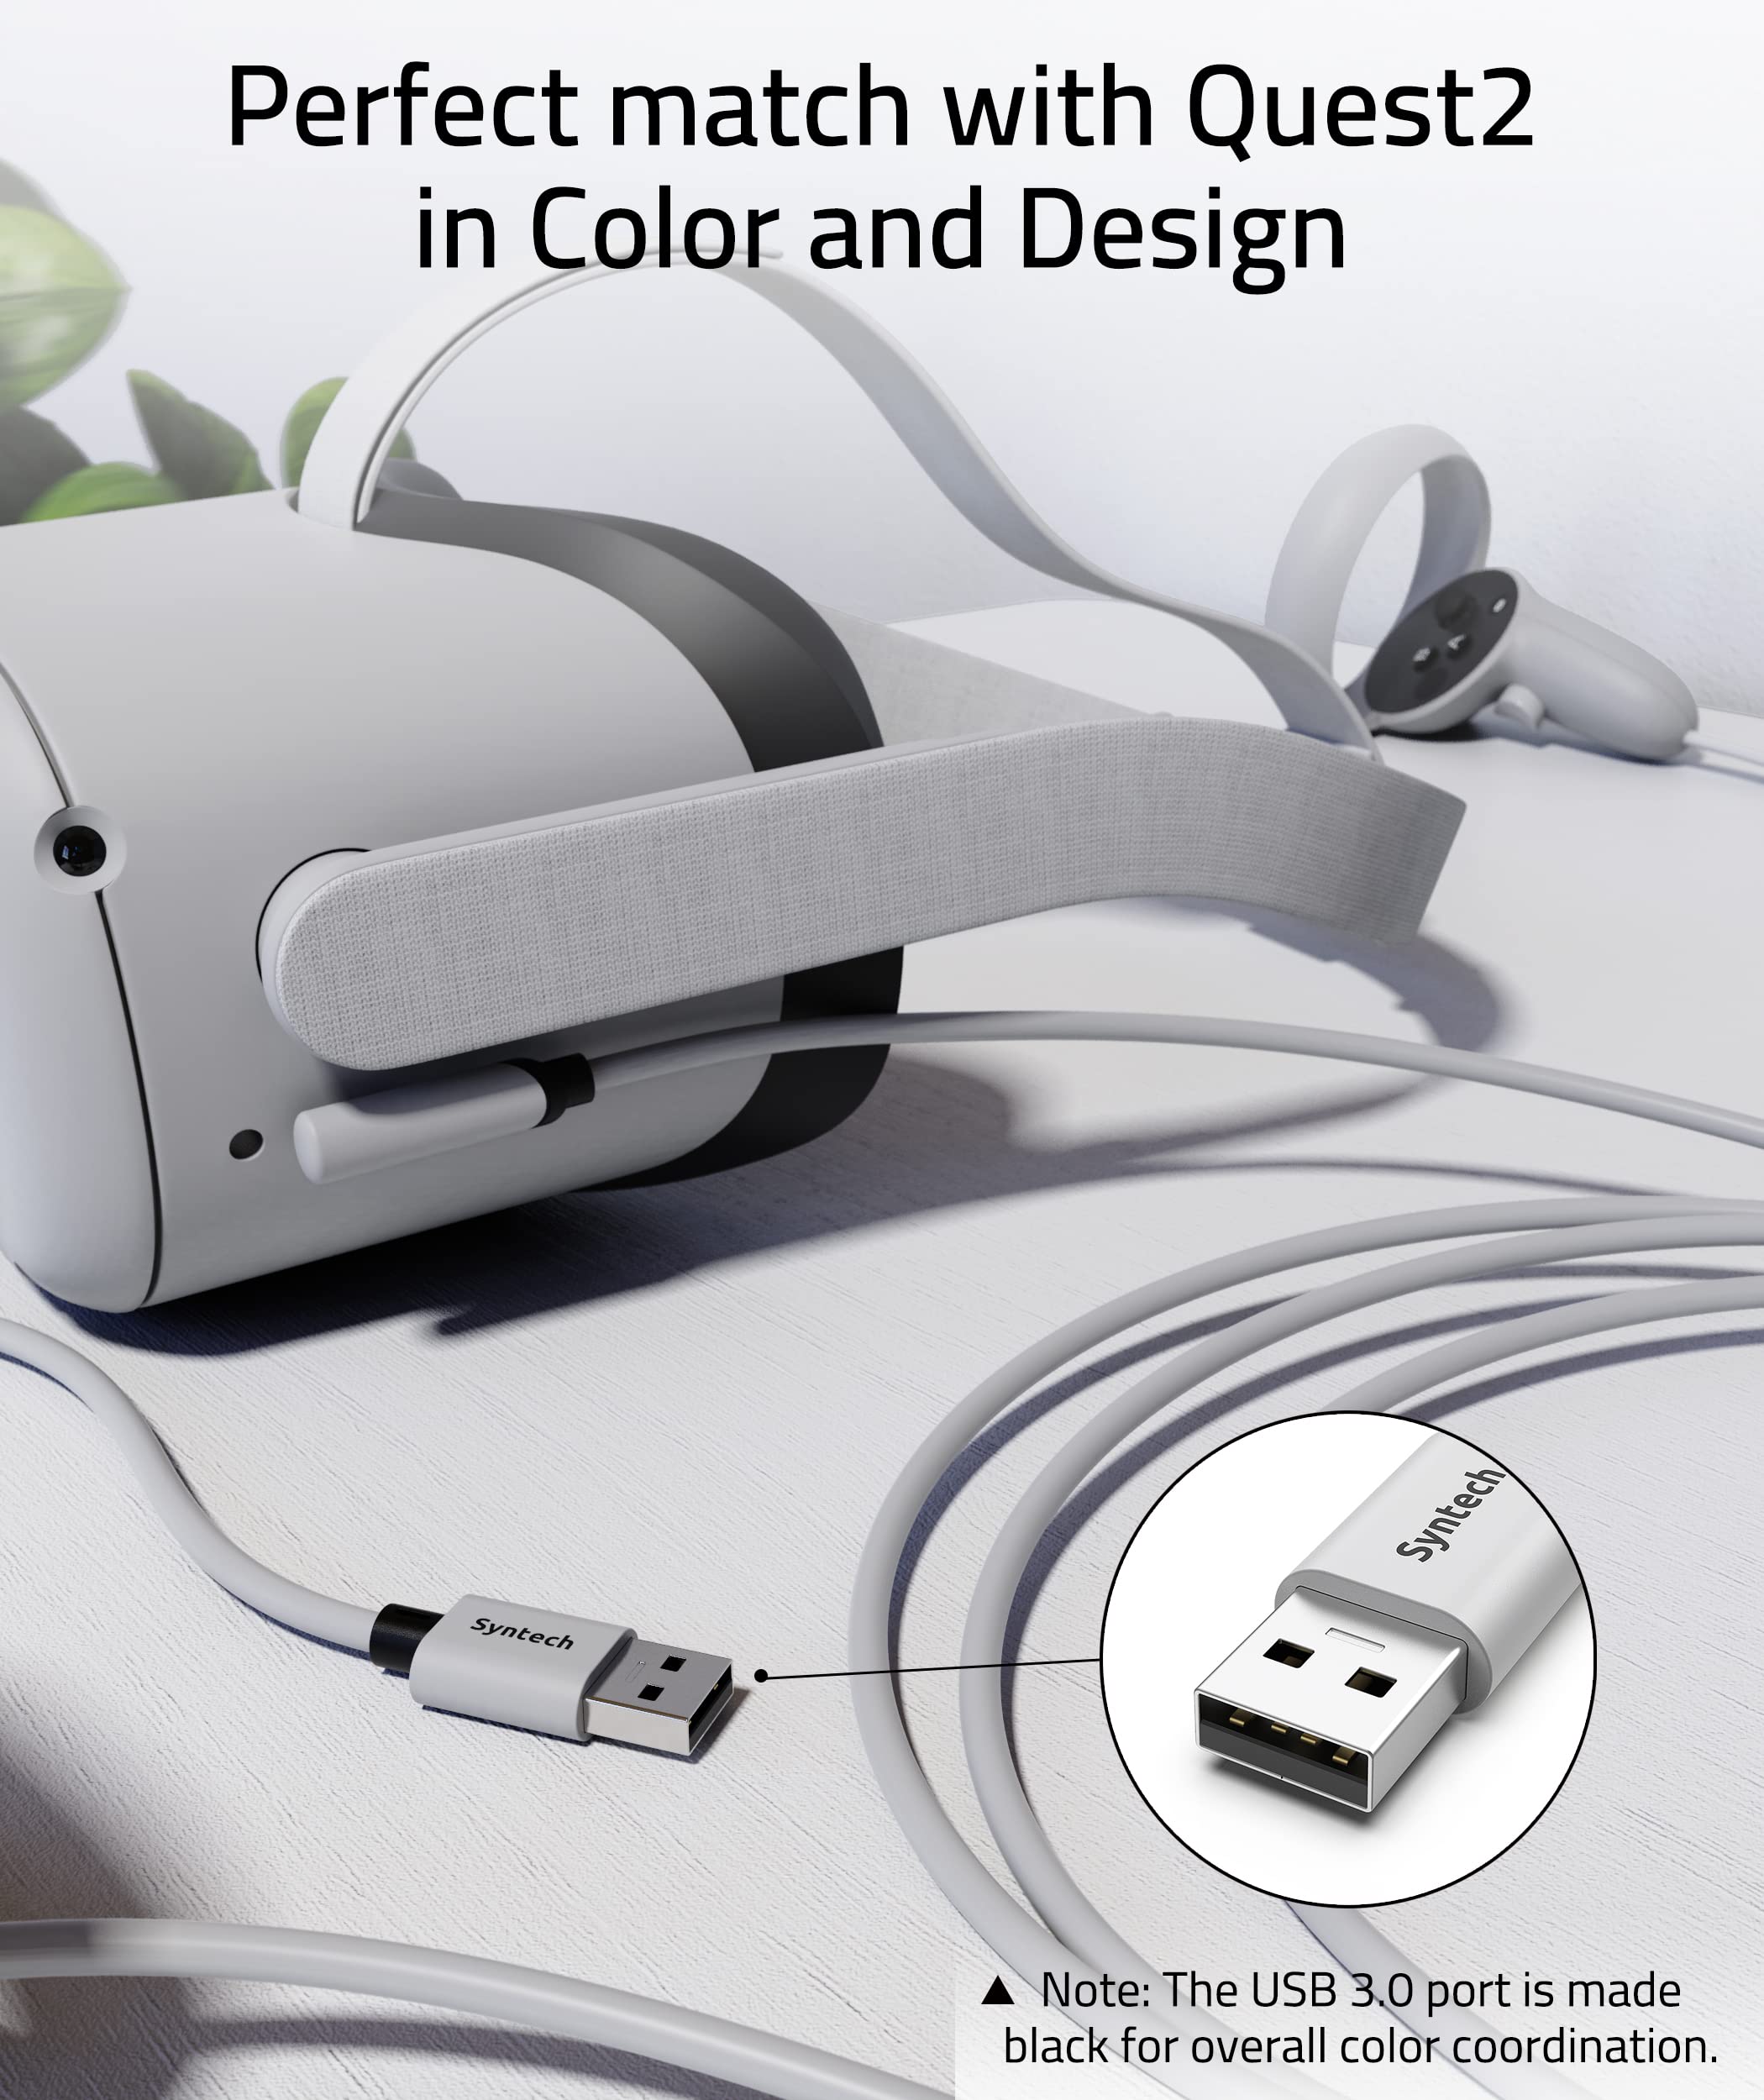 oculus quest 2 link cable is perfectly matched